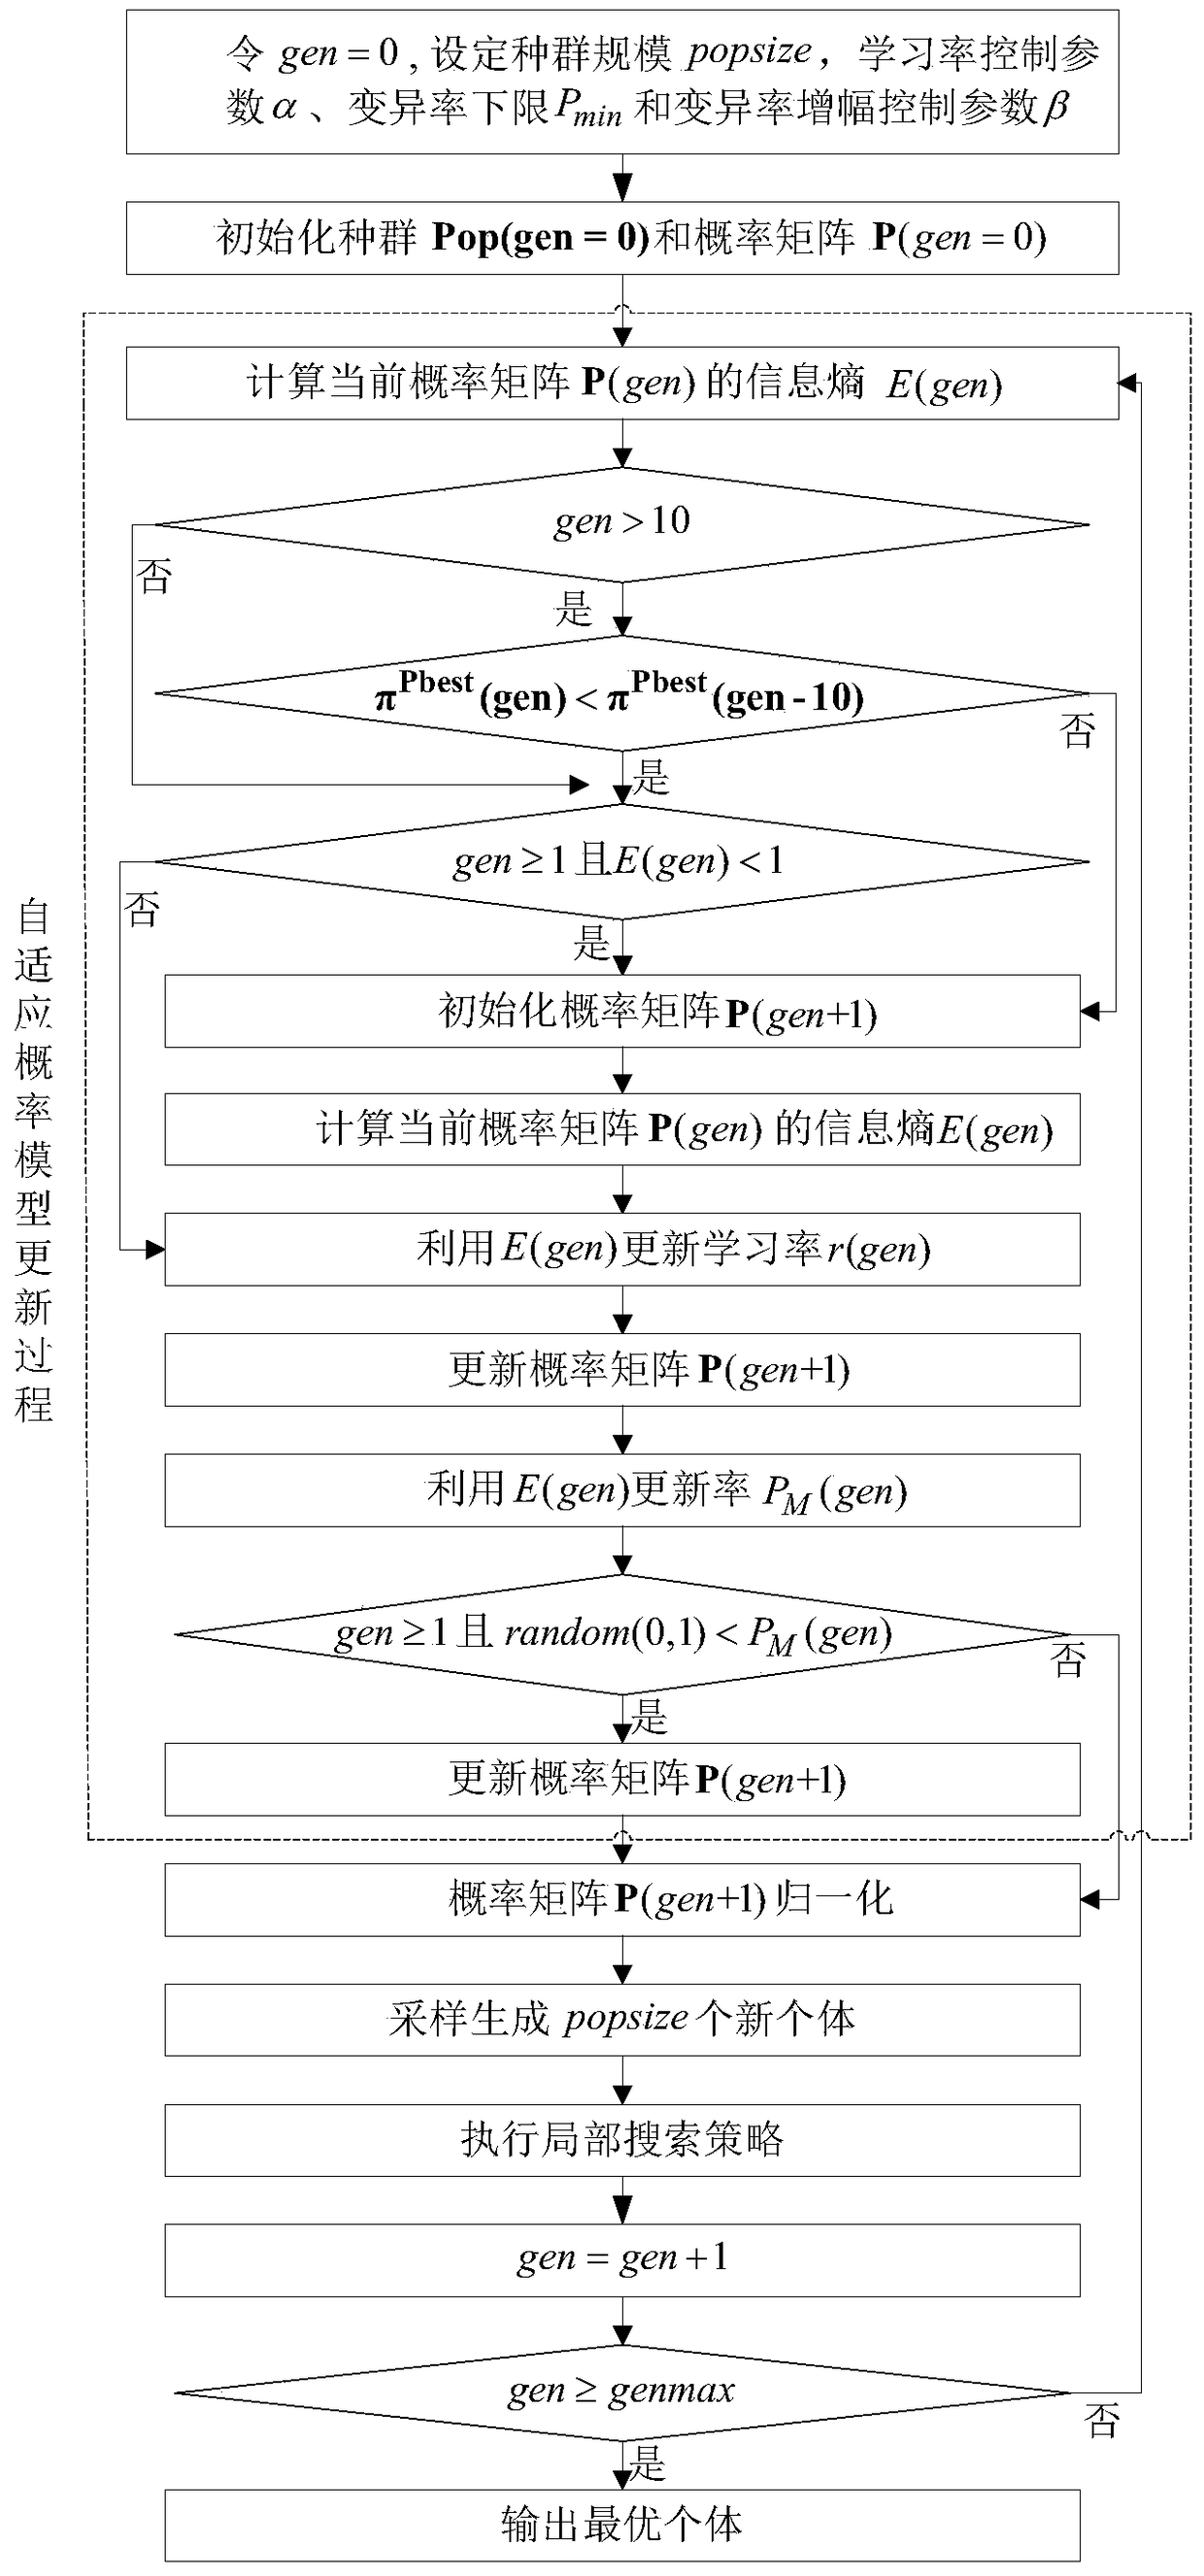 An optimal scheduling method for the production and assembly process of the air outlet of automobile air conditioner